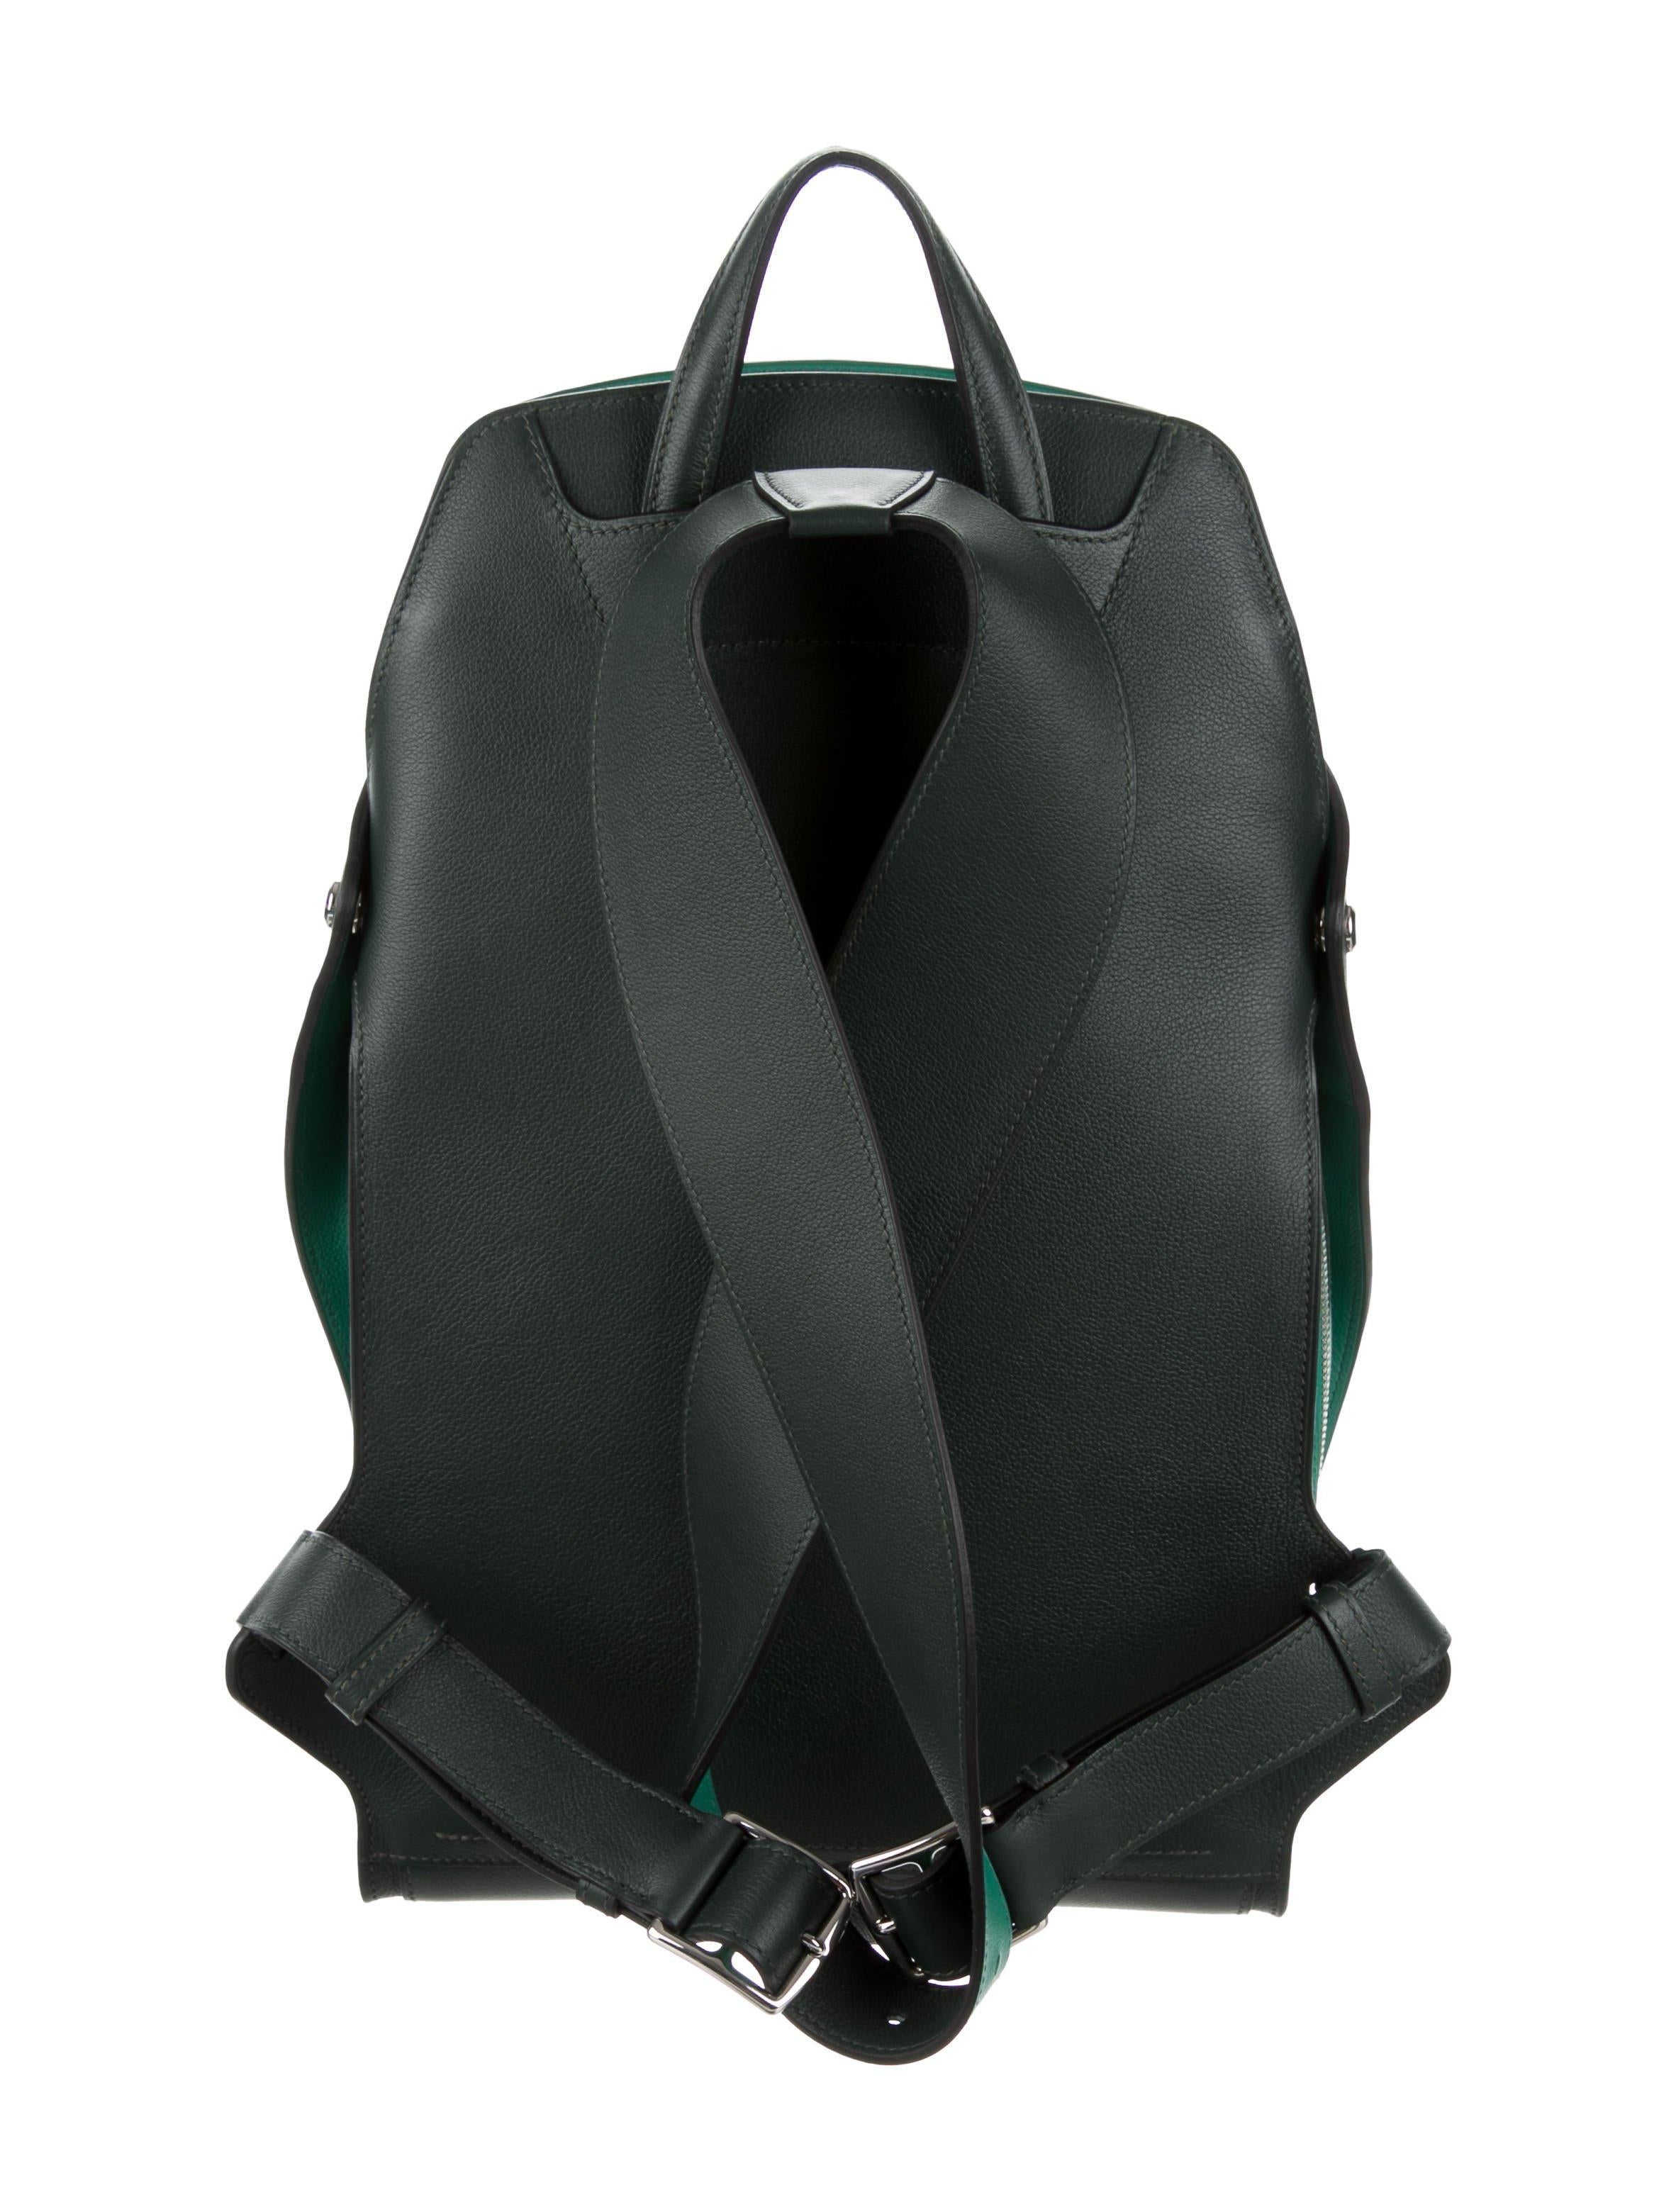 Hermes Black Green Leather Men's Women's Top Handle Backpack Travel Shoulder Bag in Box

Leather 
Palladium hardware
Woven lining
Zipper closure
Date code present
Made in France
Handle drop 2